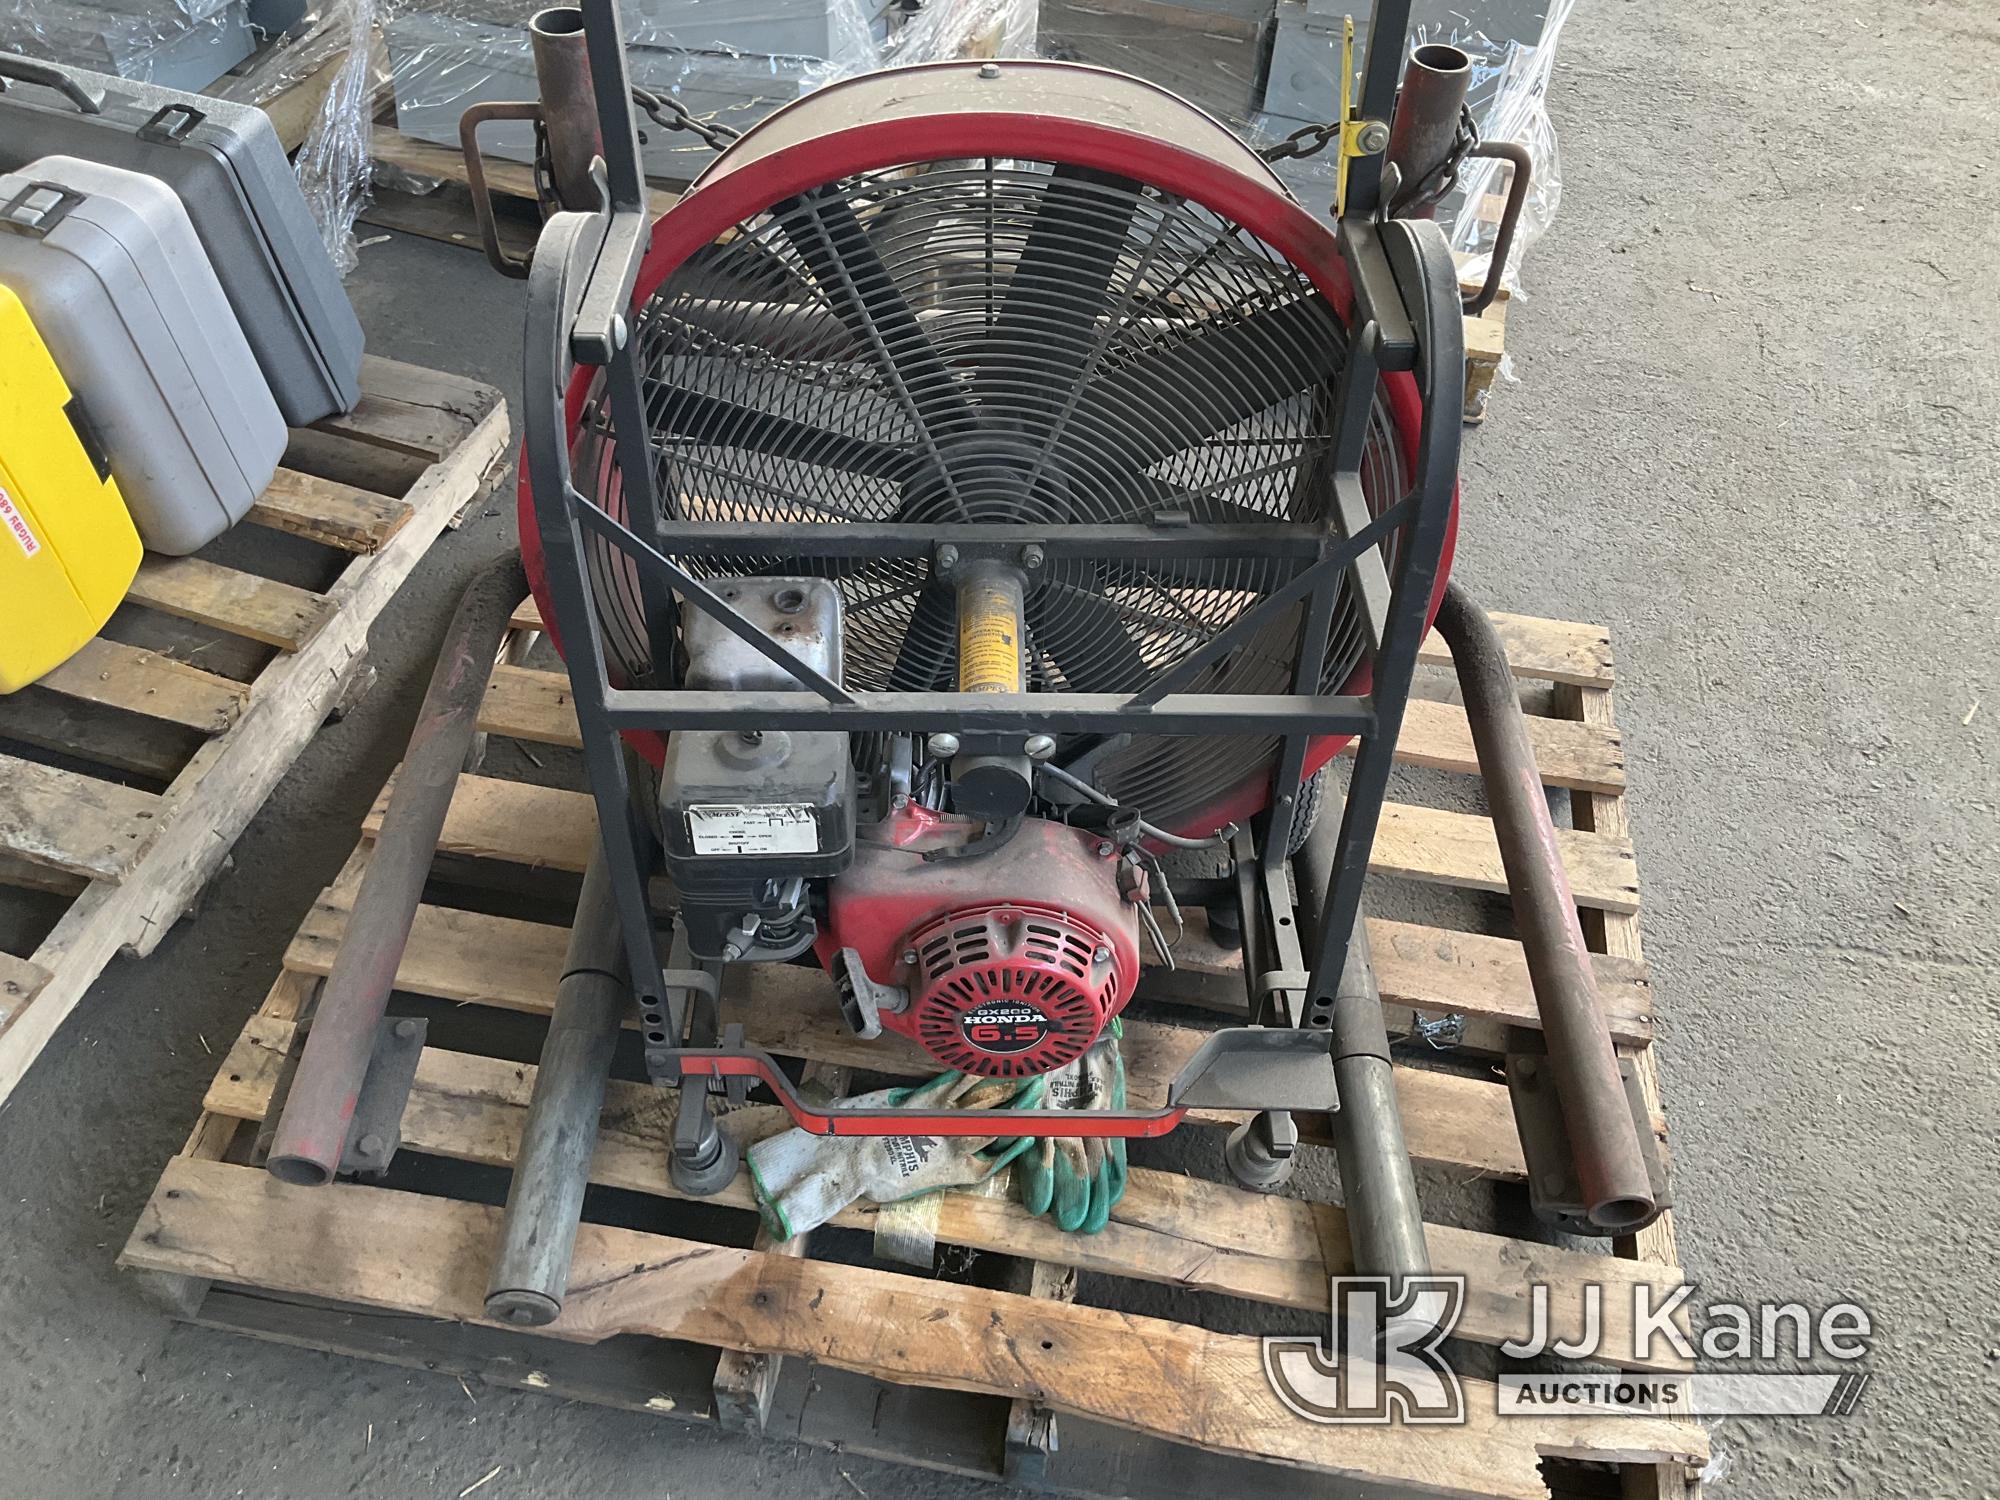 (Jurupa Valley, CA) Tempest Power Blower / Fan (Used) NOTE: This unit is being sold AS IS/WHERE IS v